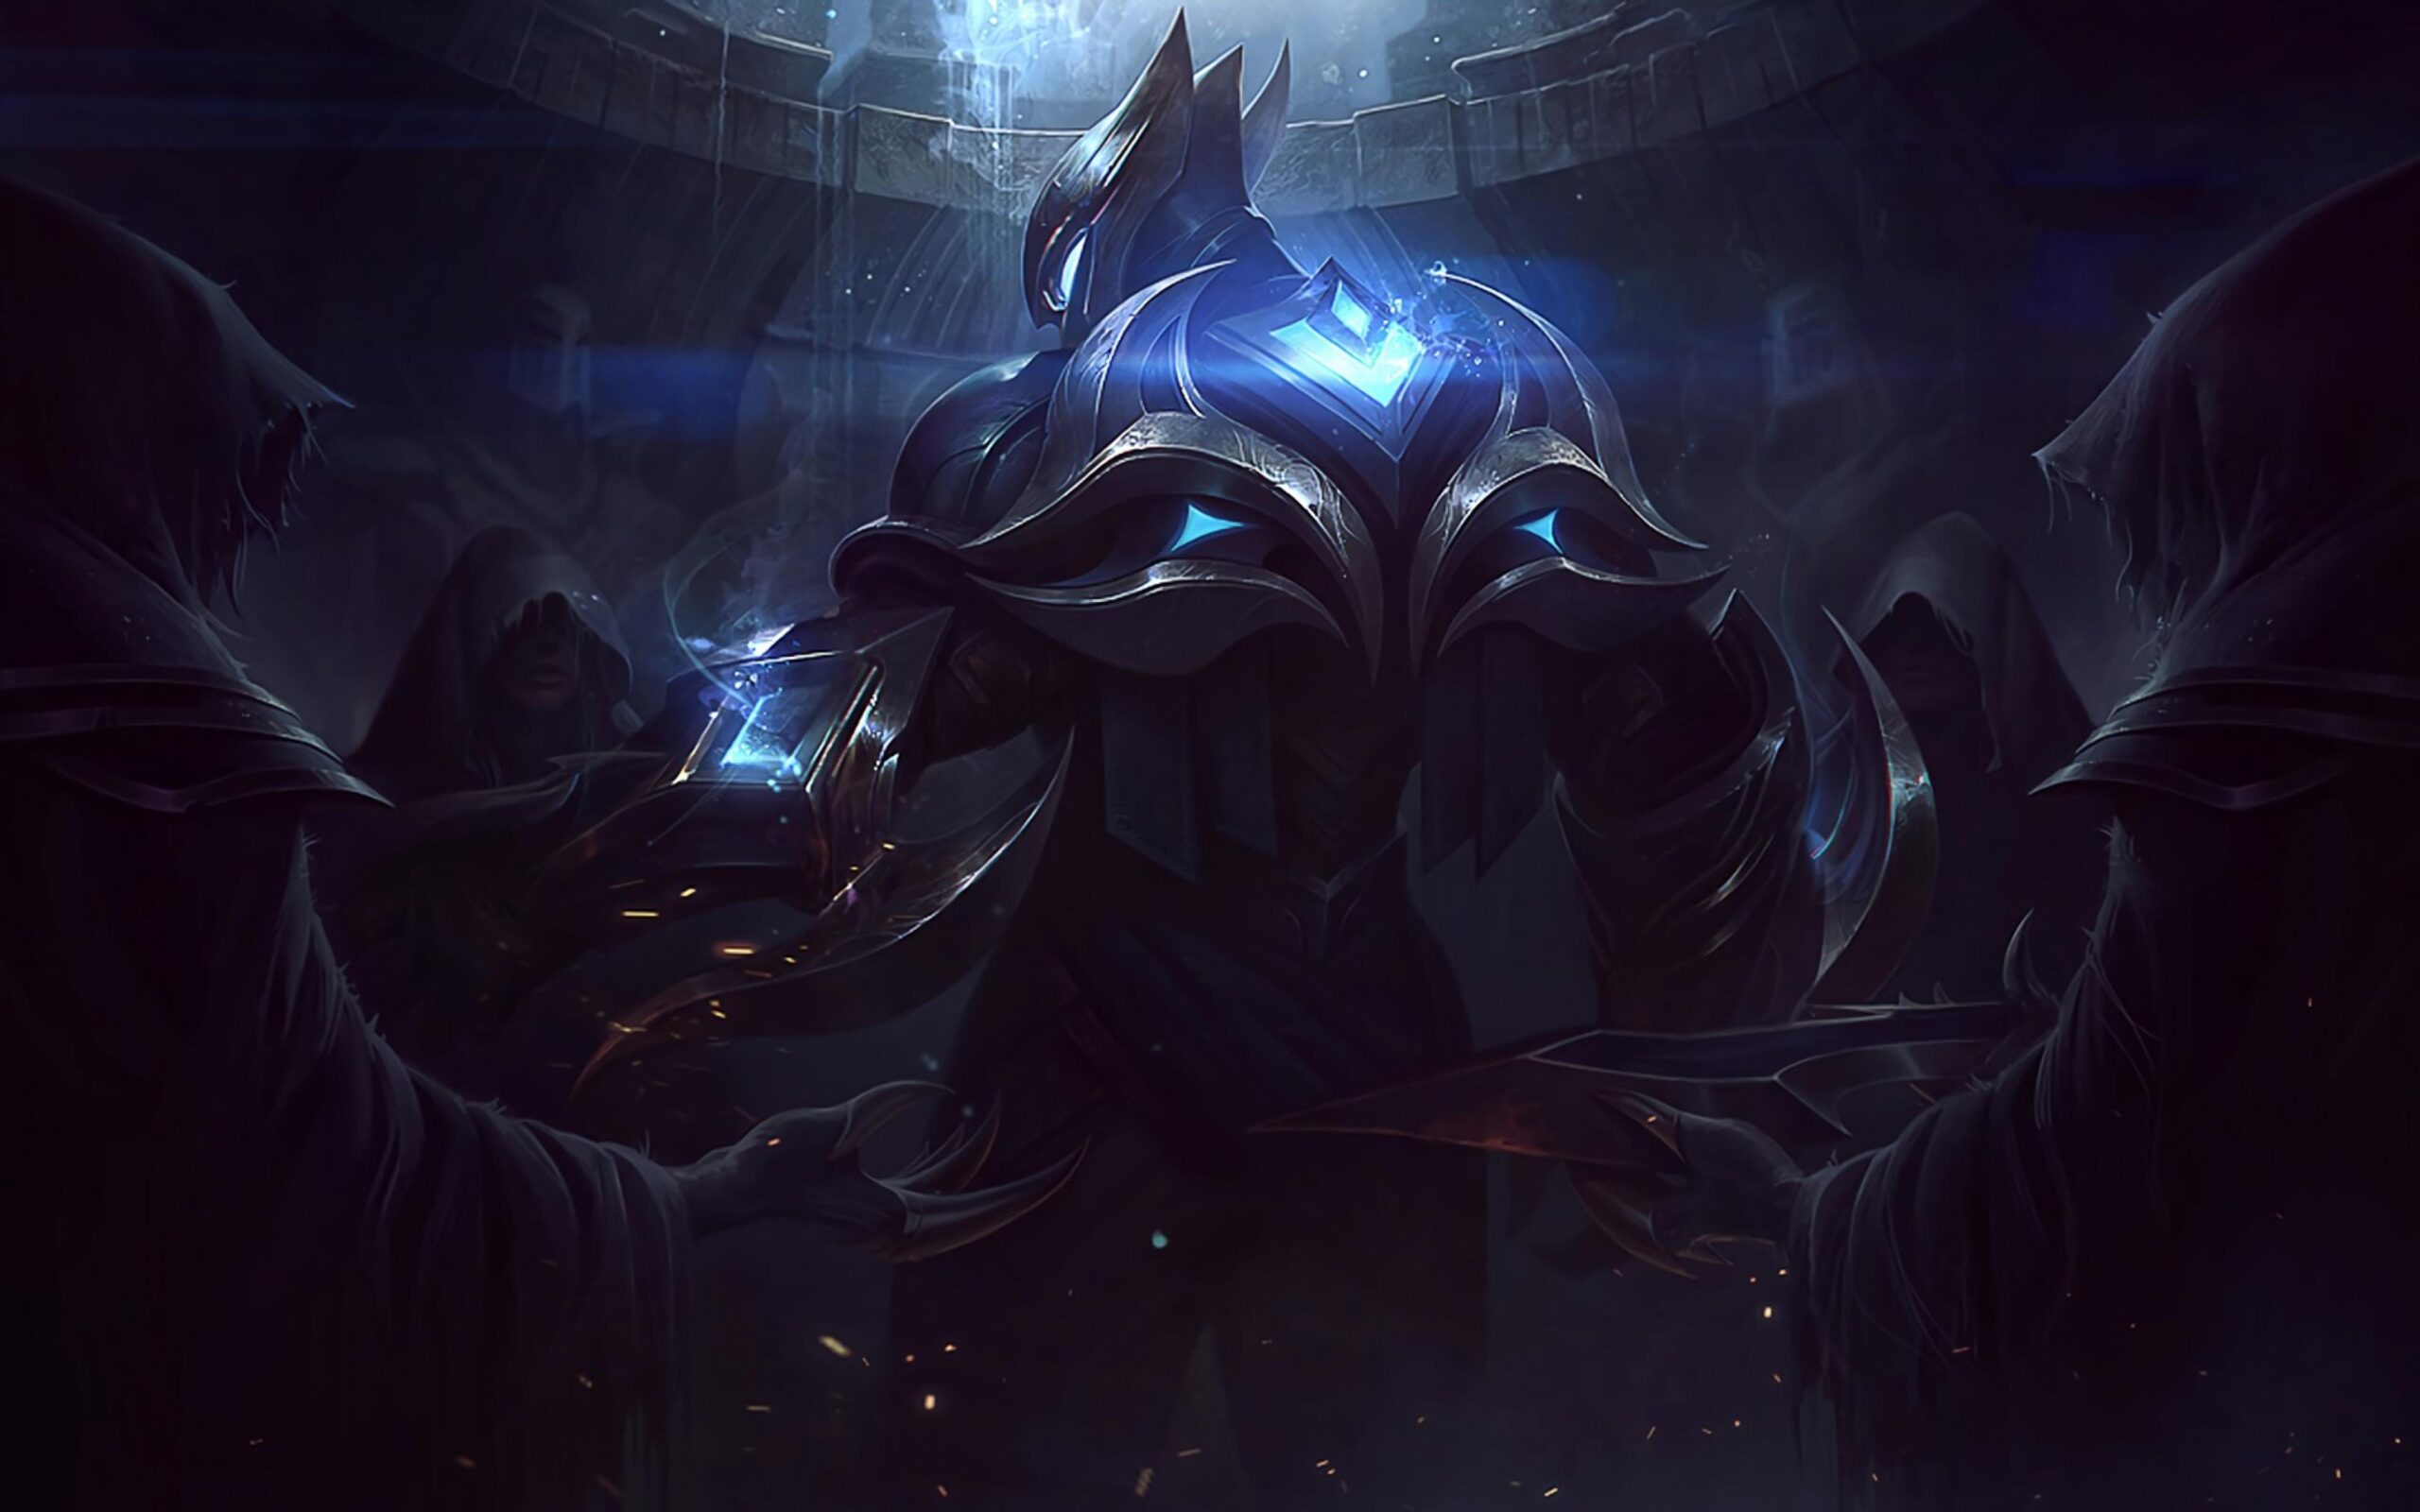 Download Zed LOL Championship K resolution ratio wallpapers